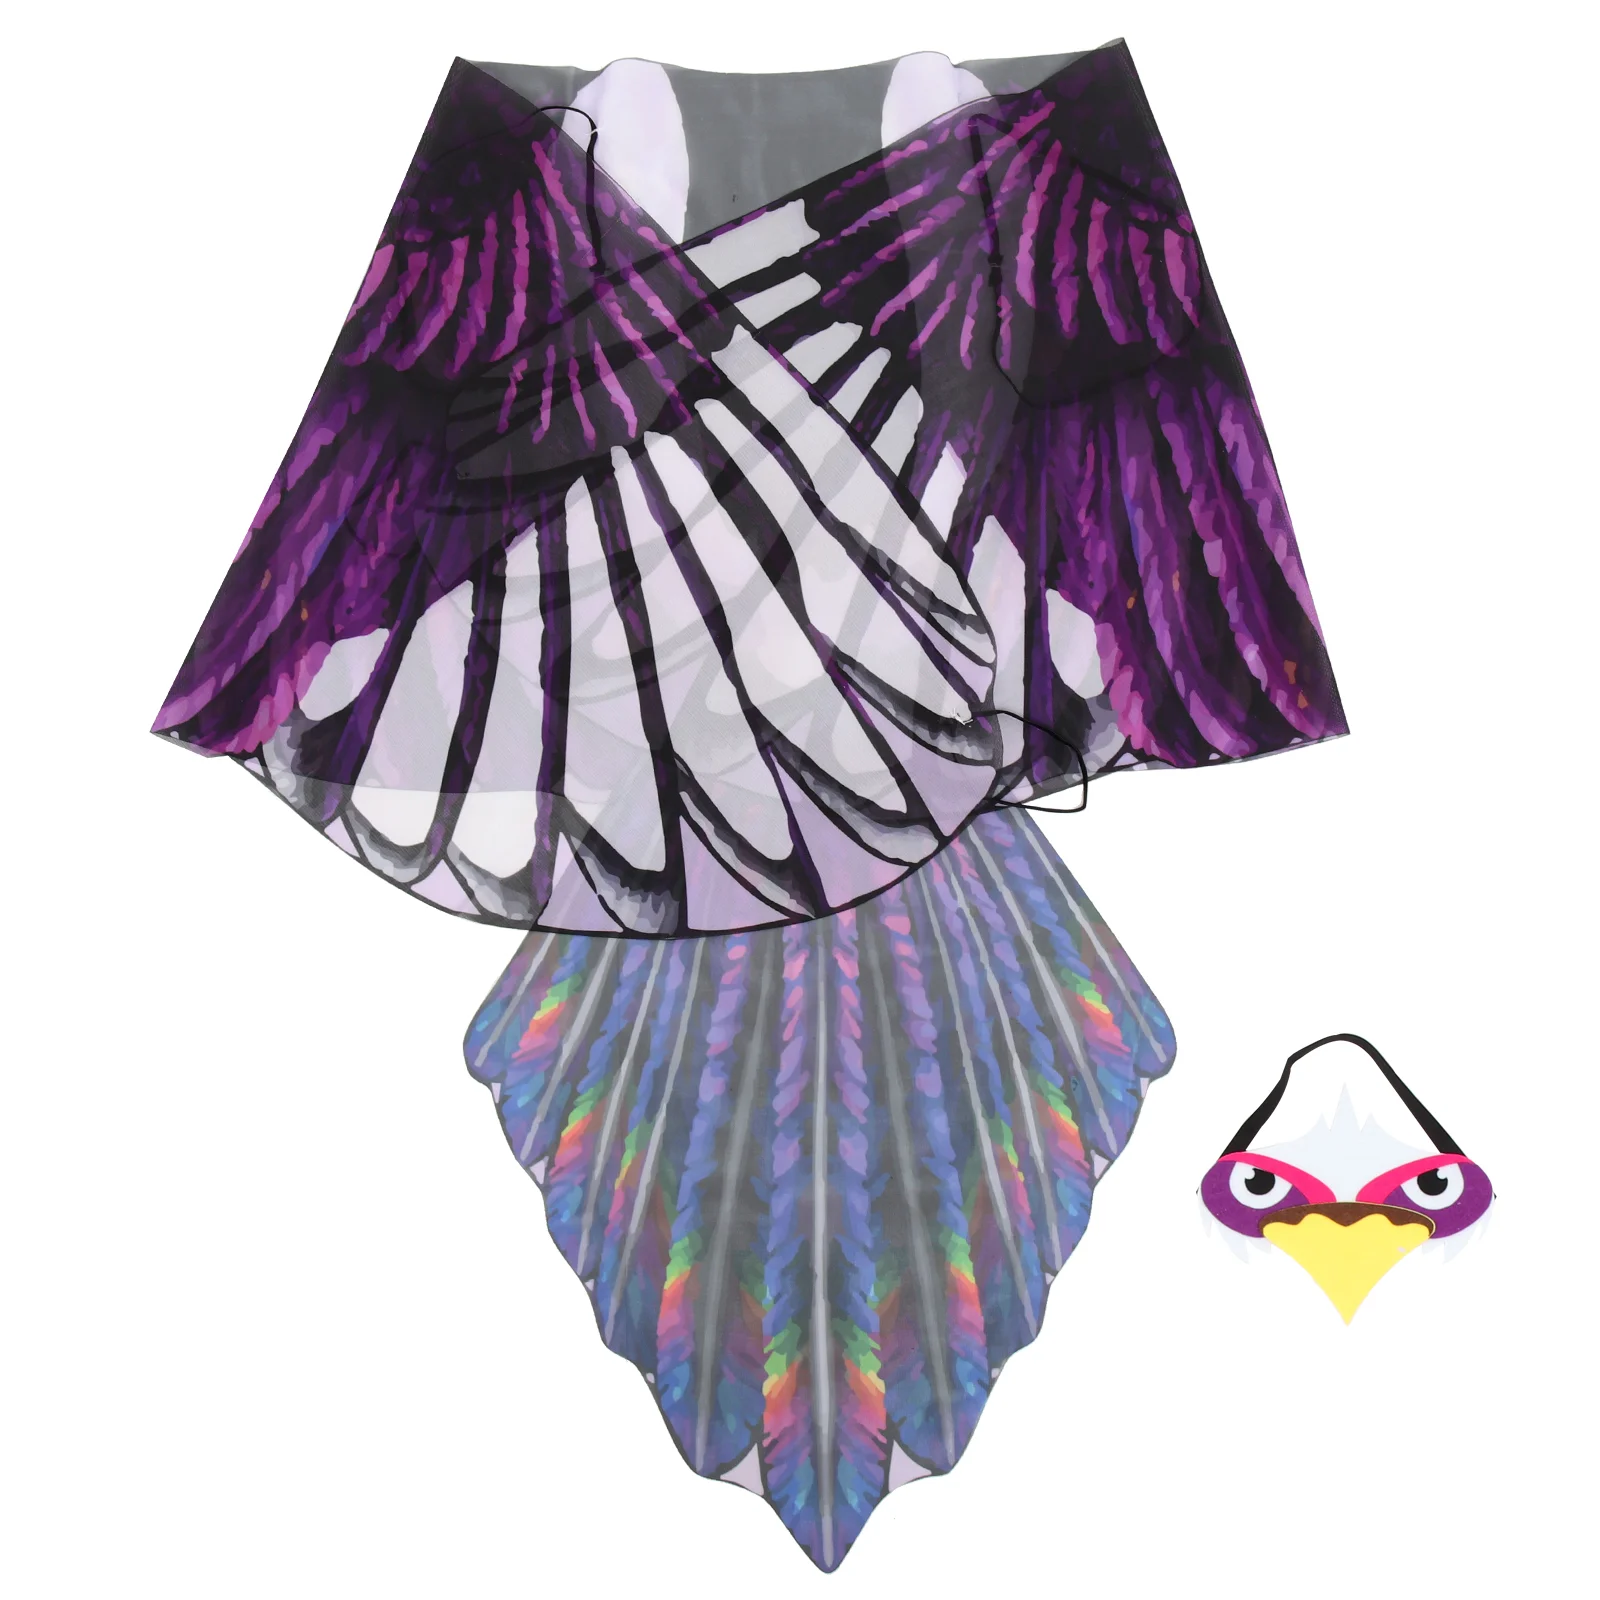 

Eagle Wings Kids Accessories Girls Cosplay Prop Wing-shaped Ornament Chiffon Party Favor Child Adult Halloween Costume